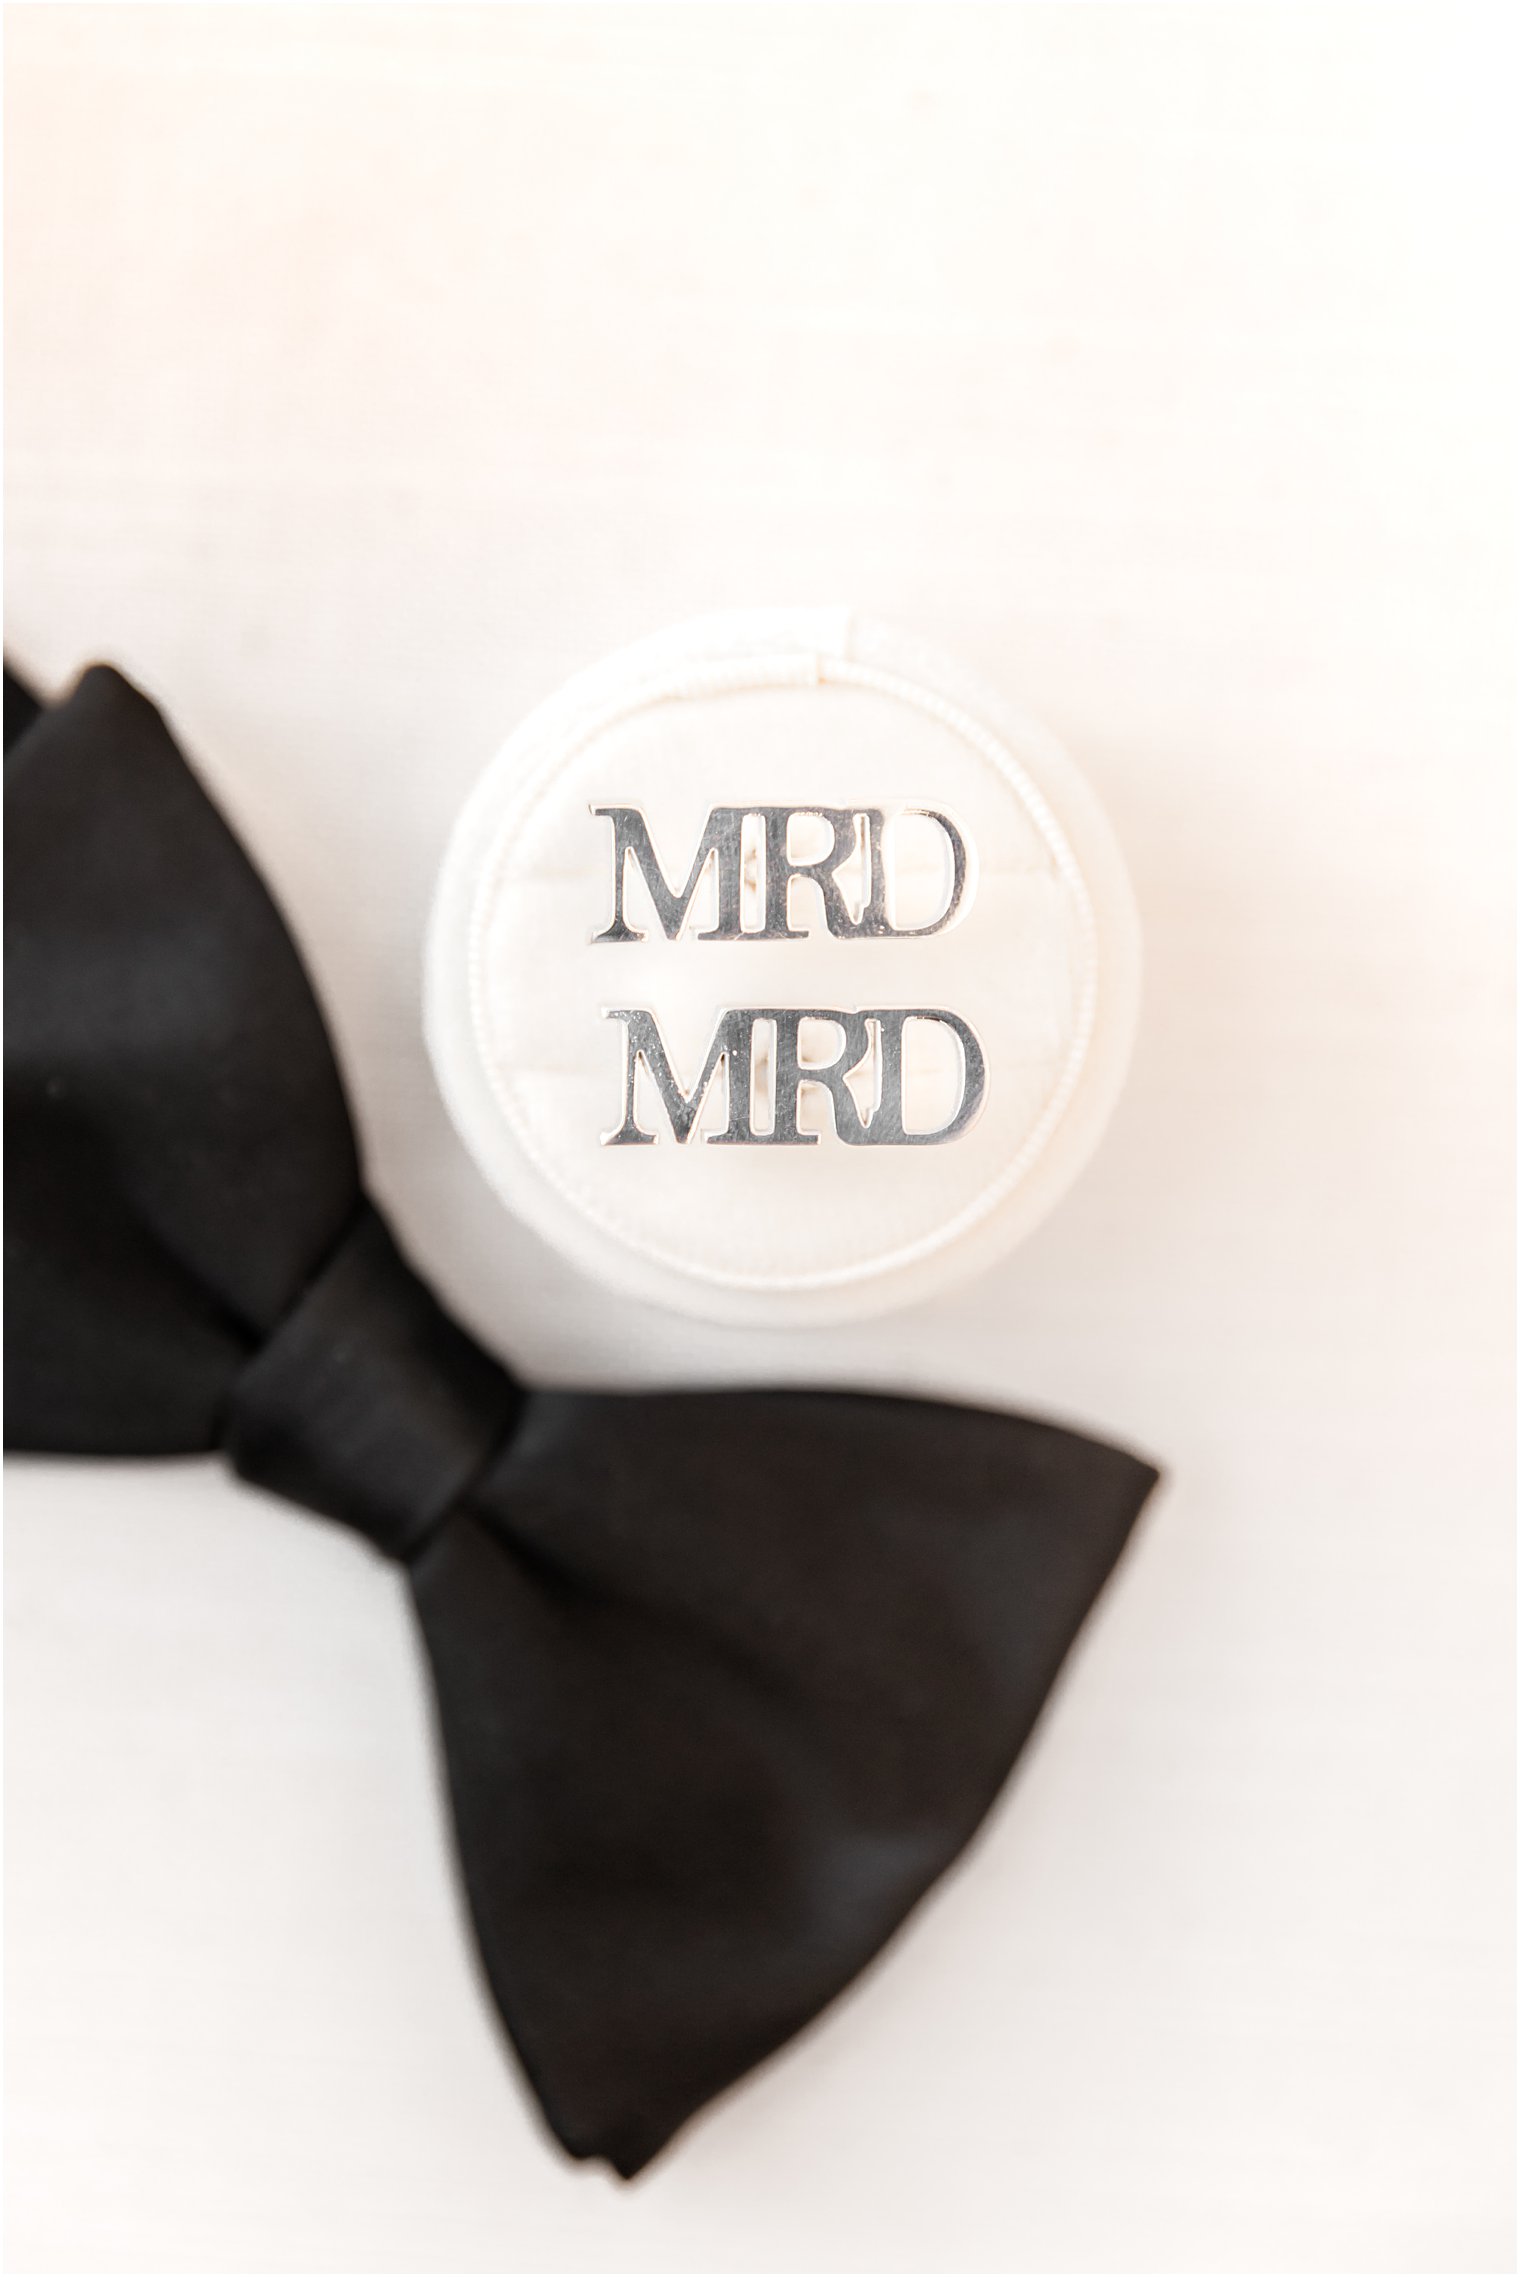 groom's ring box with MRD